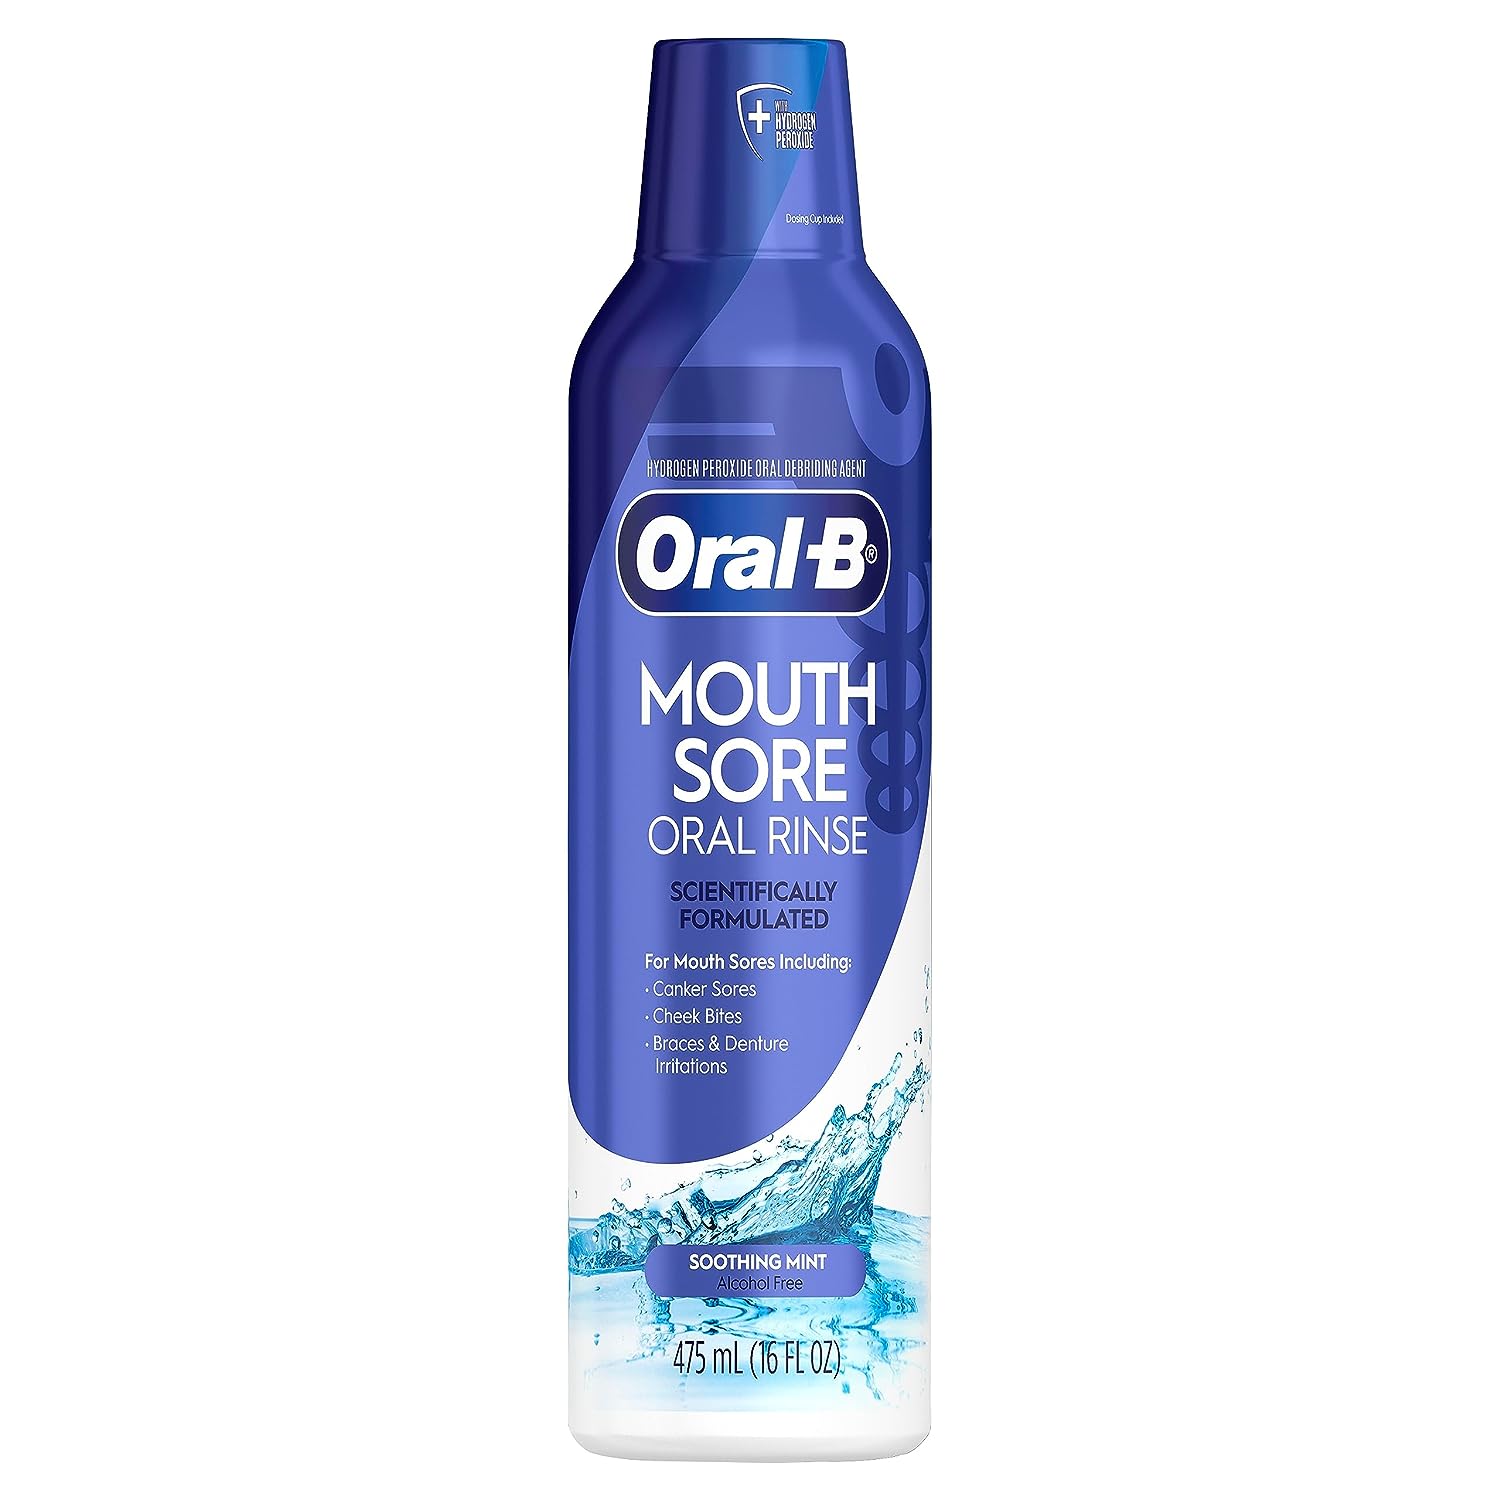 Oral-B Mouth Sore Mouthwash Special Care Oral Rinse